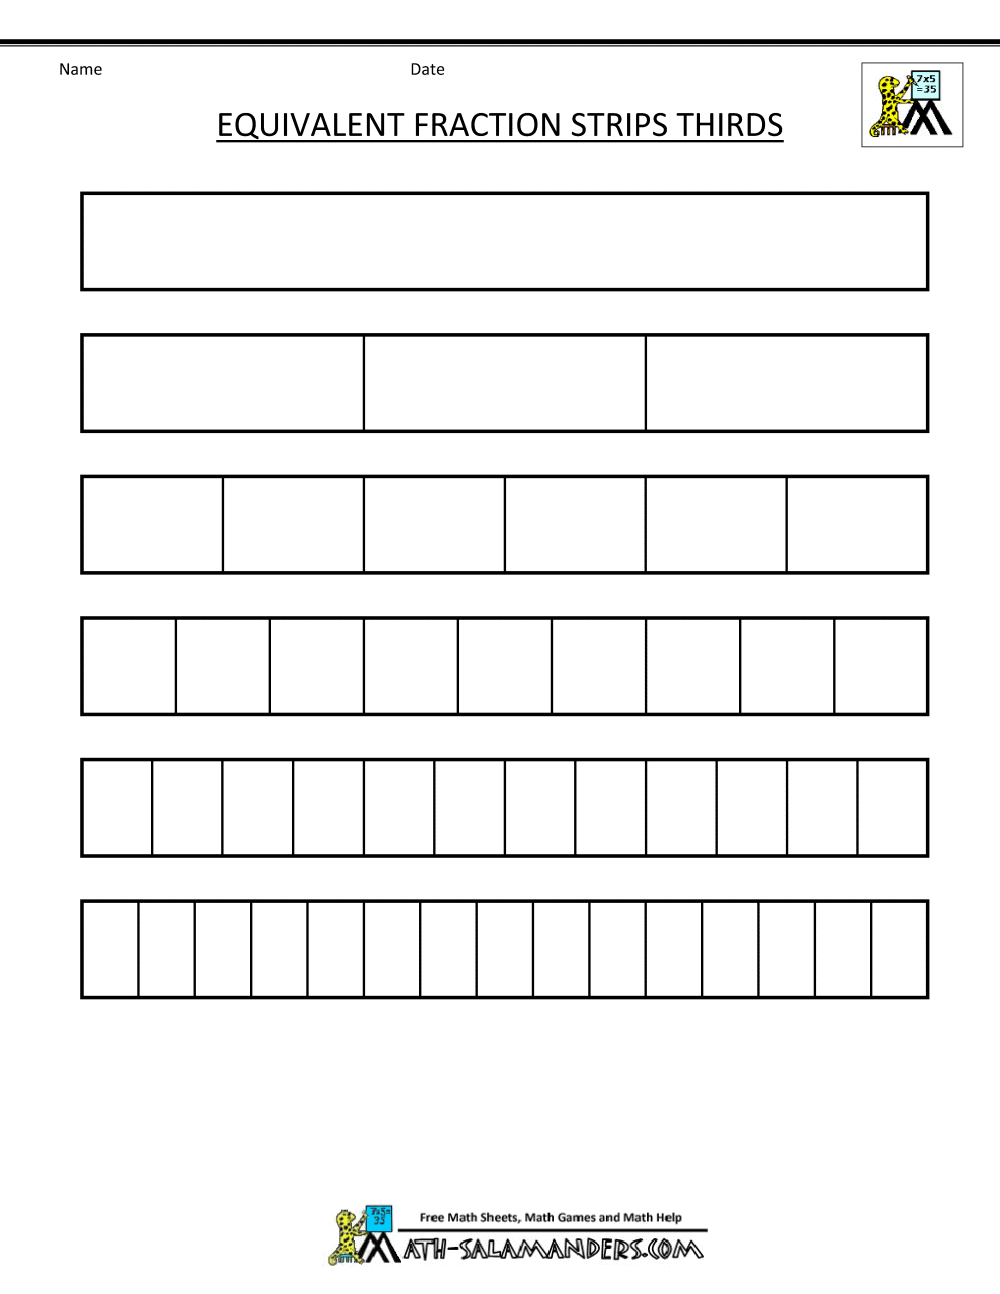 Fraction Strip Equivalent Fractions Thirds Blank